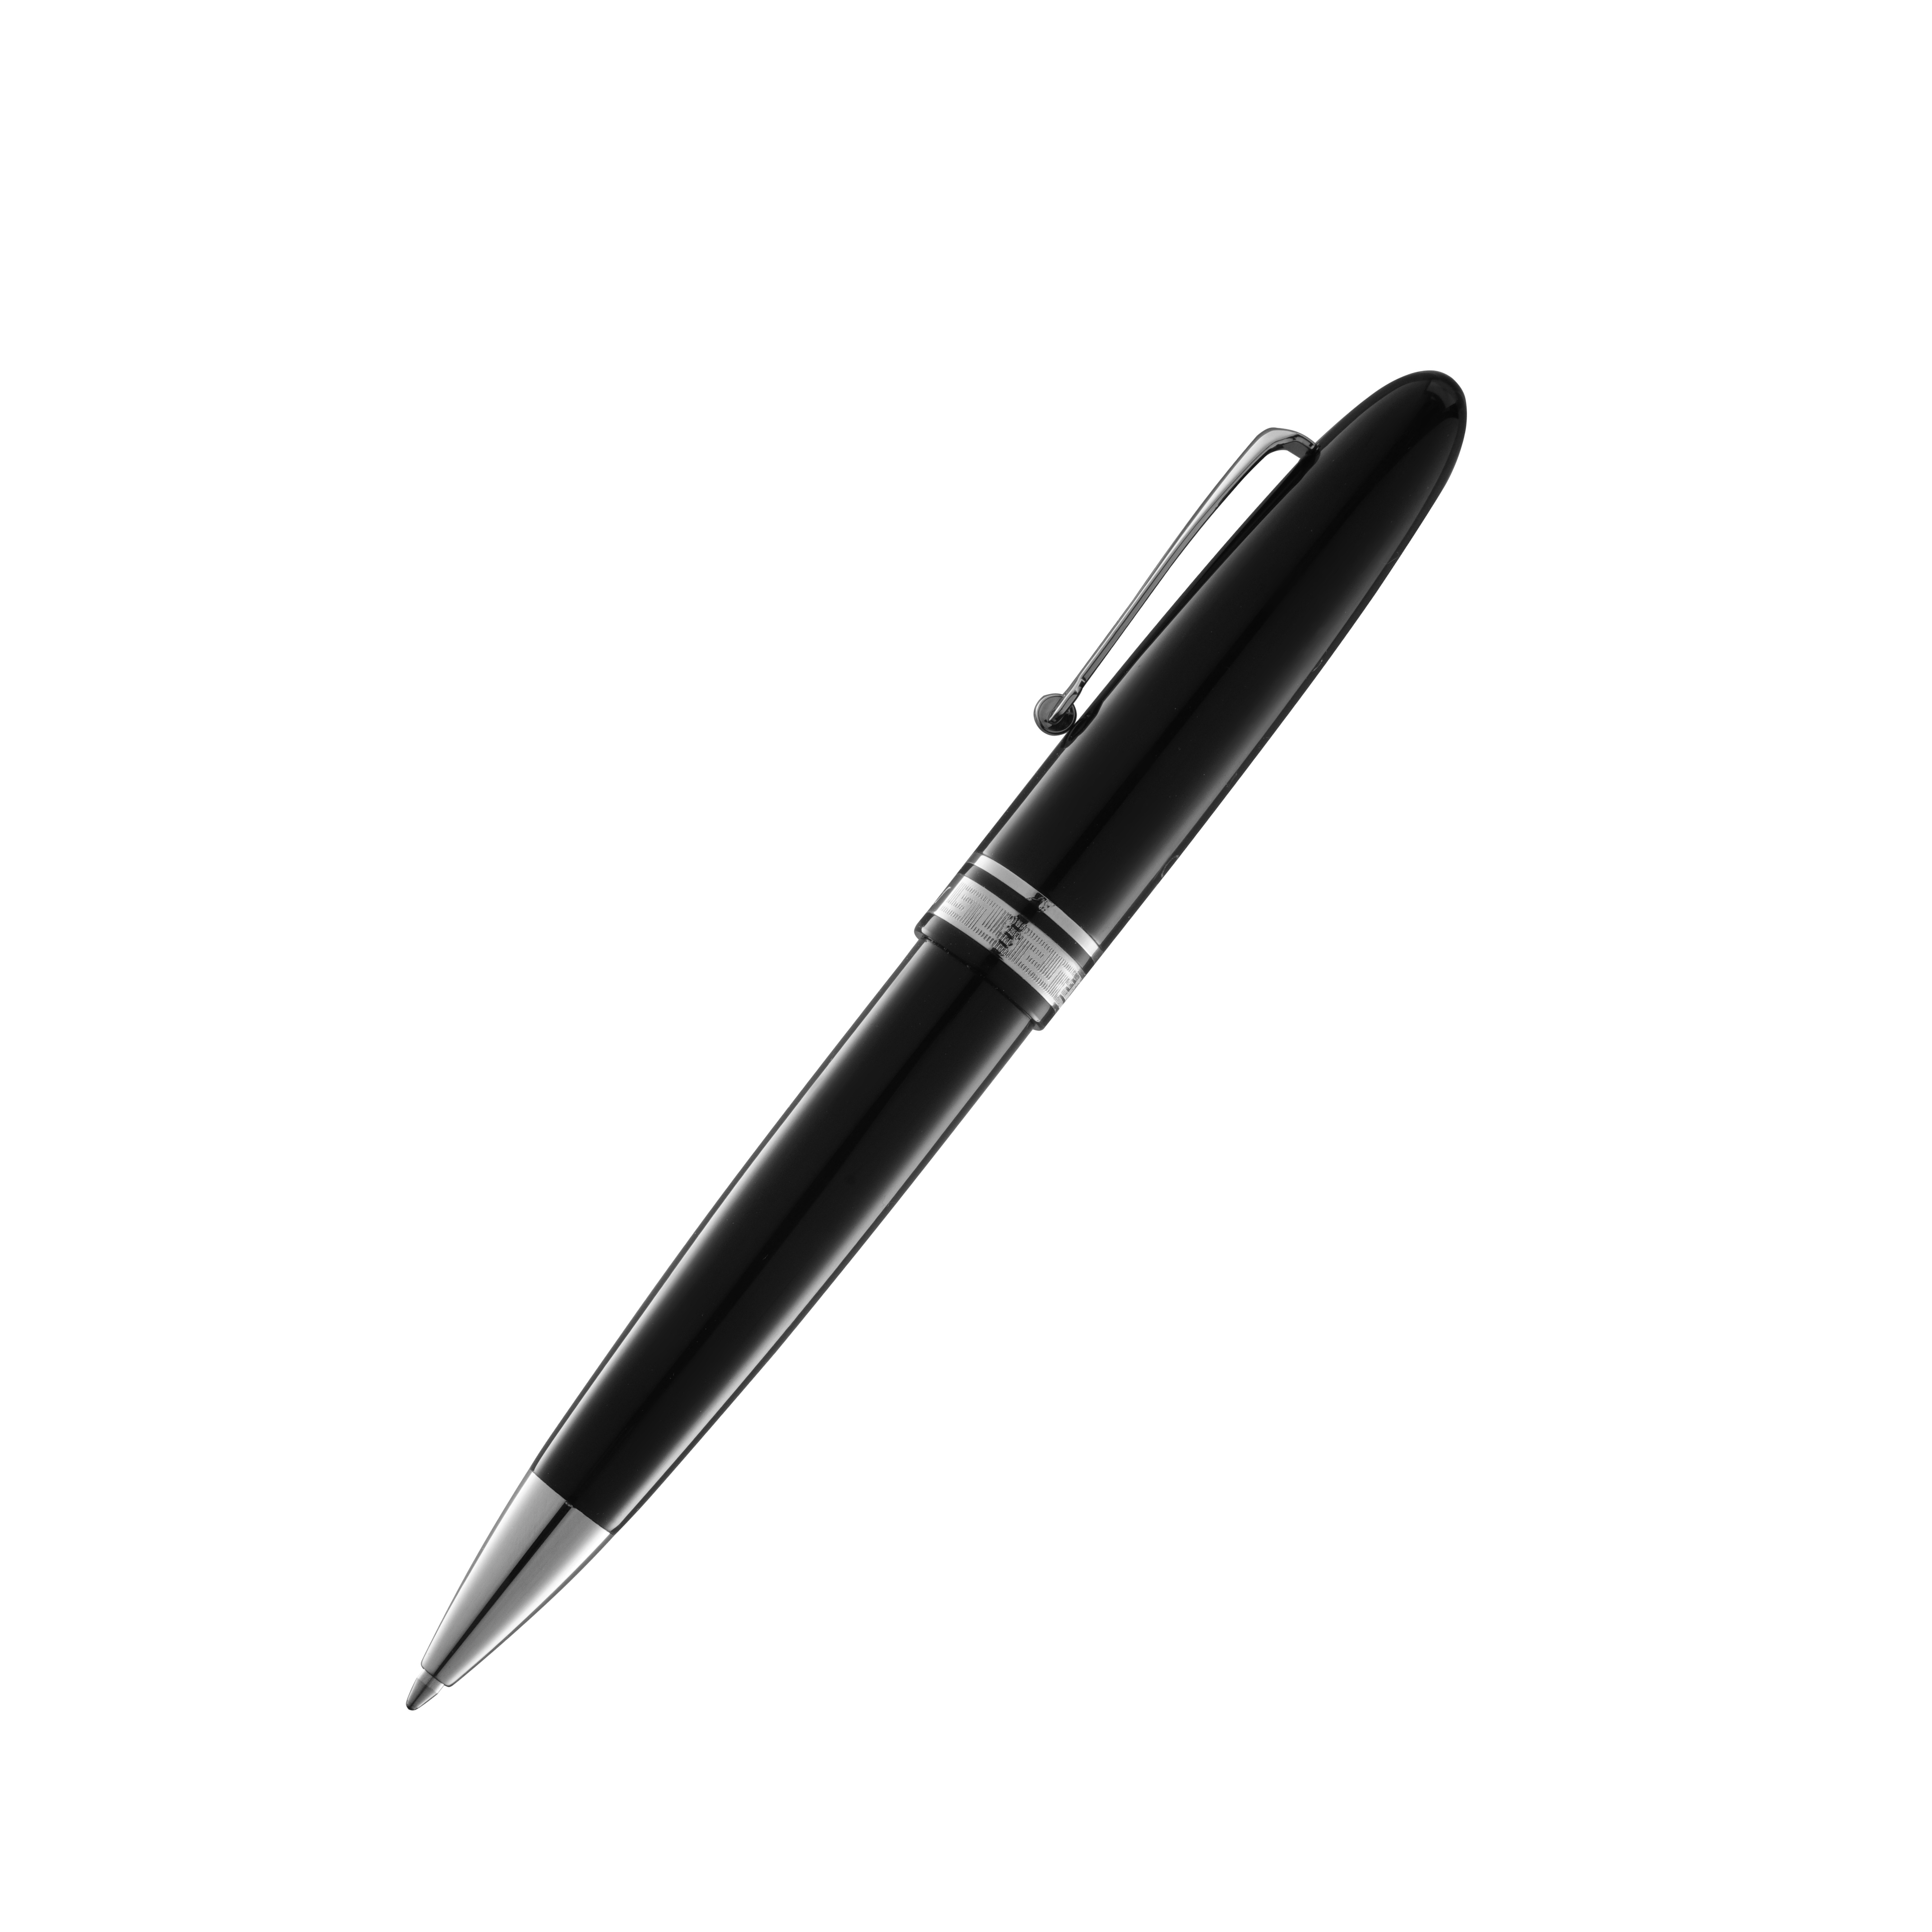 Omas Ogiva Ballpoint Pen in Nera with Silver Trim